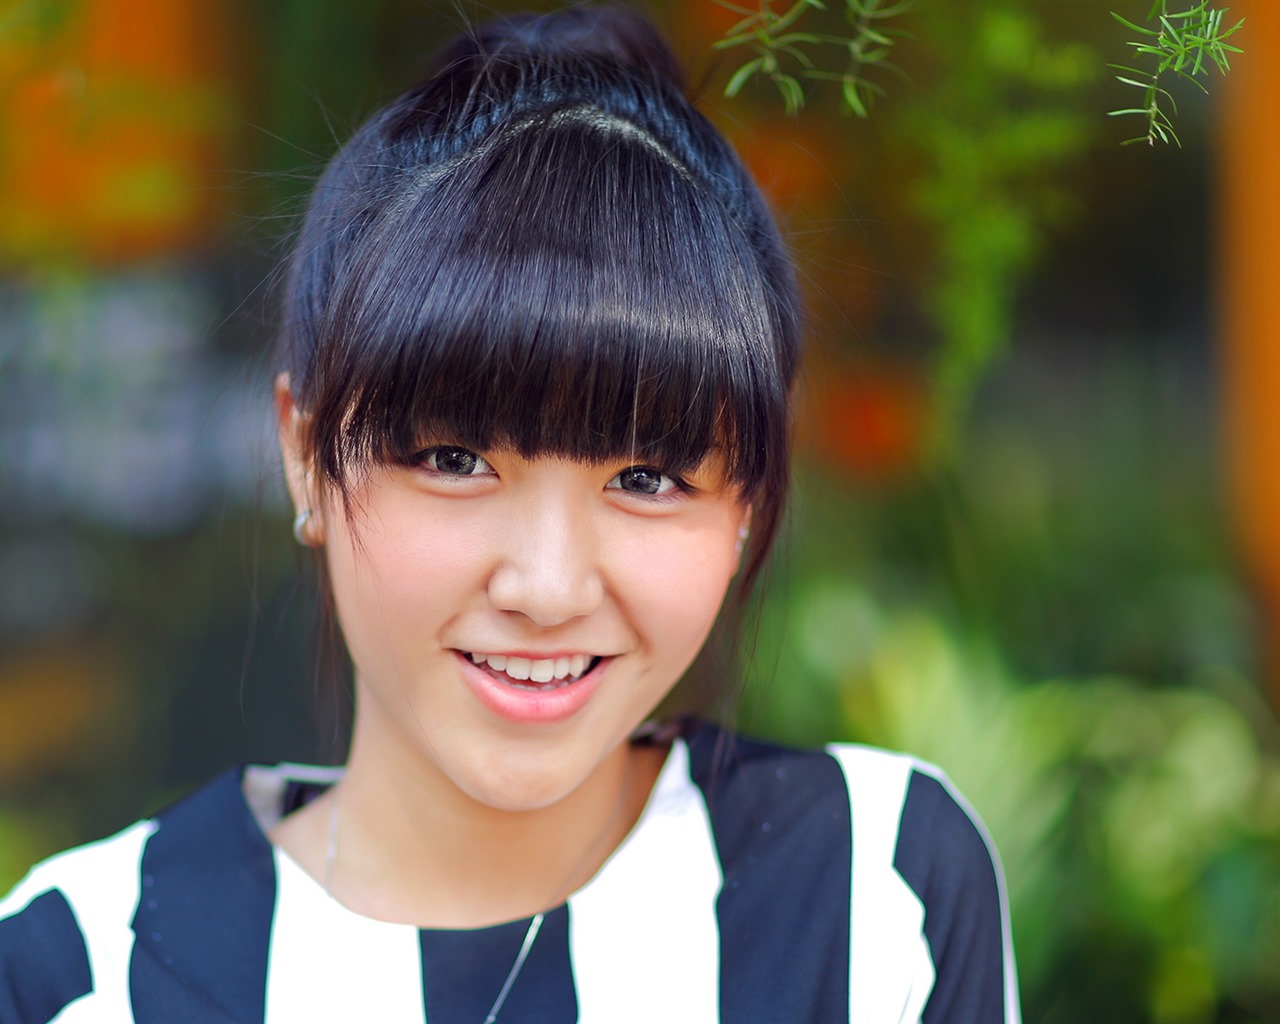 Pure and lovely young Asian girl HD wallpapers collection (4) #37 - 1280x1024